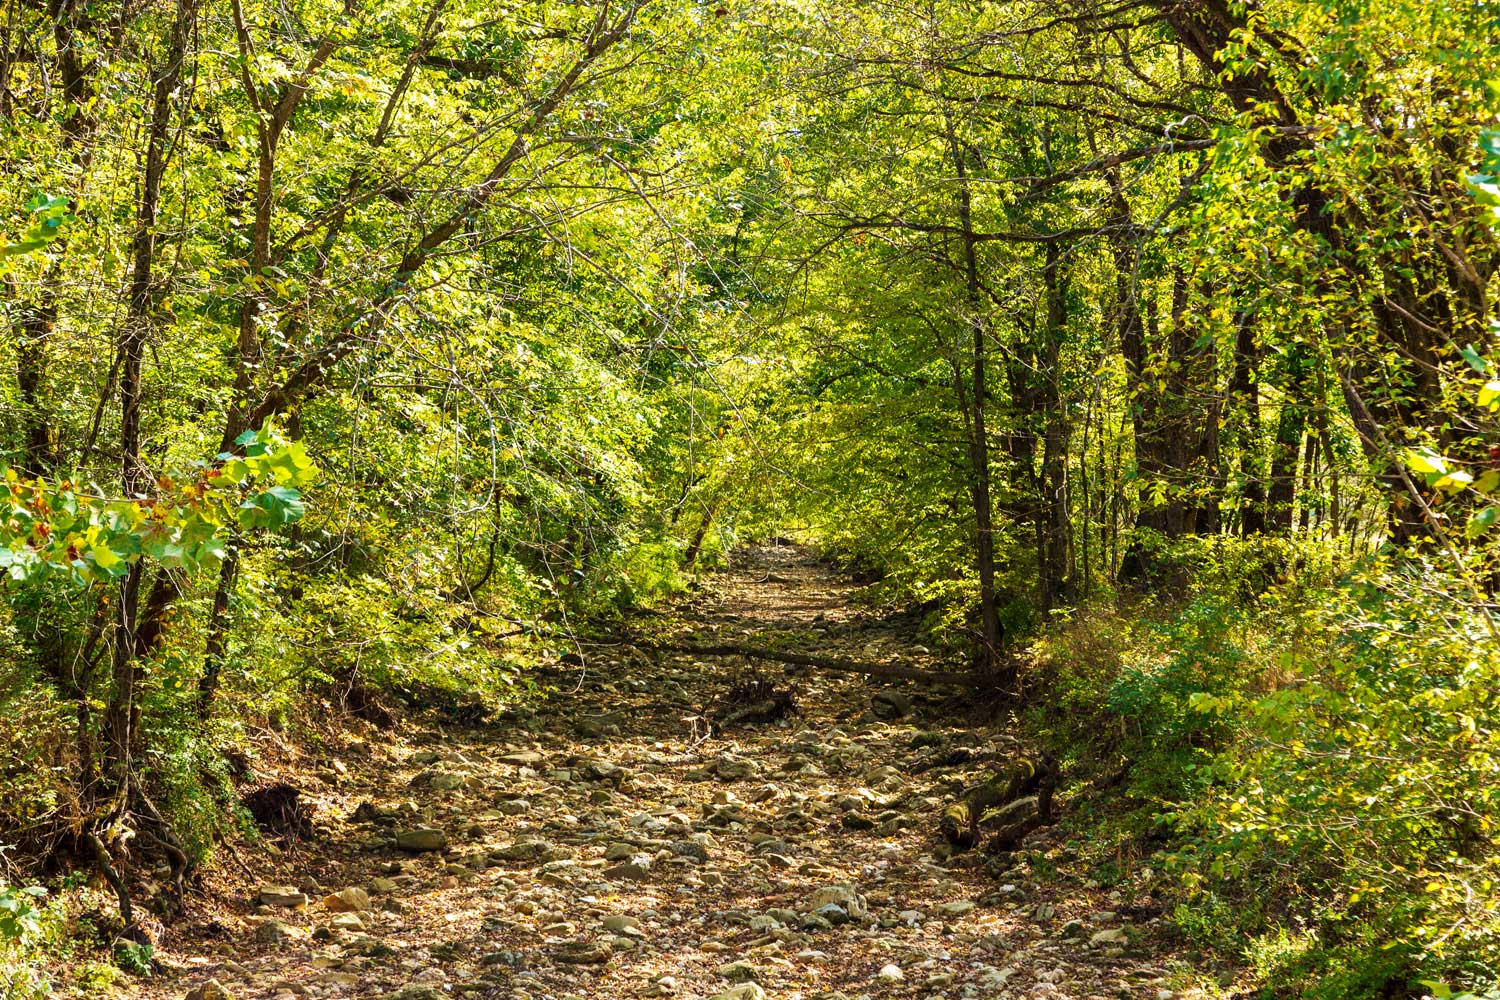 Photo of a trail in Mark Twain National Forest, Missouri. The photo shows dense stands of broadleaved trees on either side of a rocky trail.